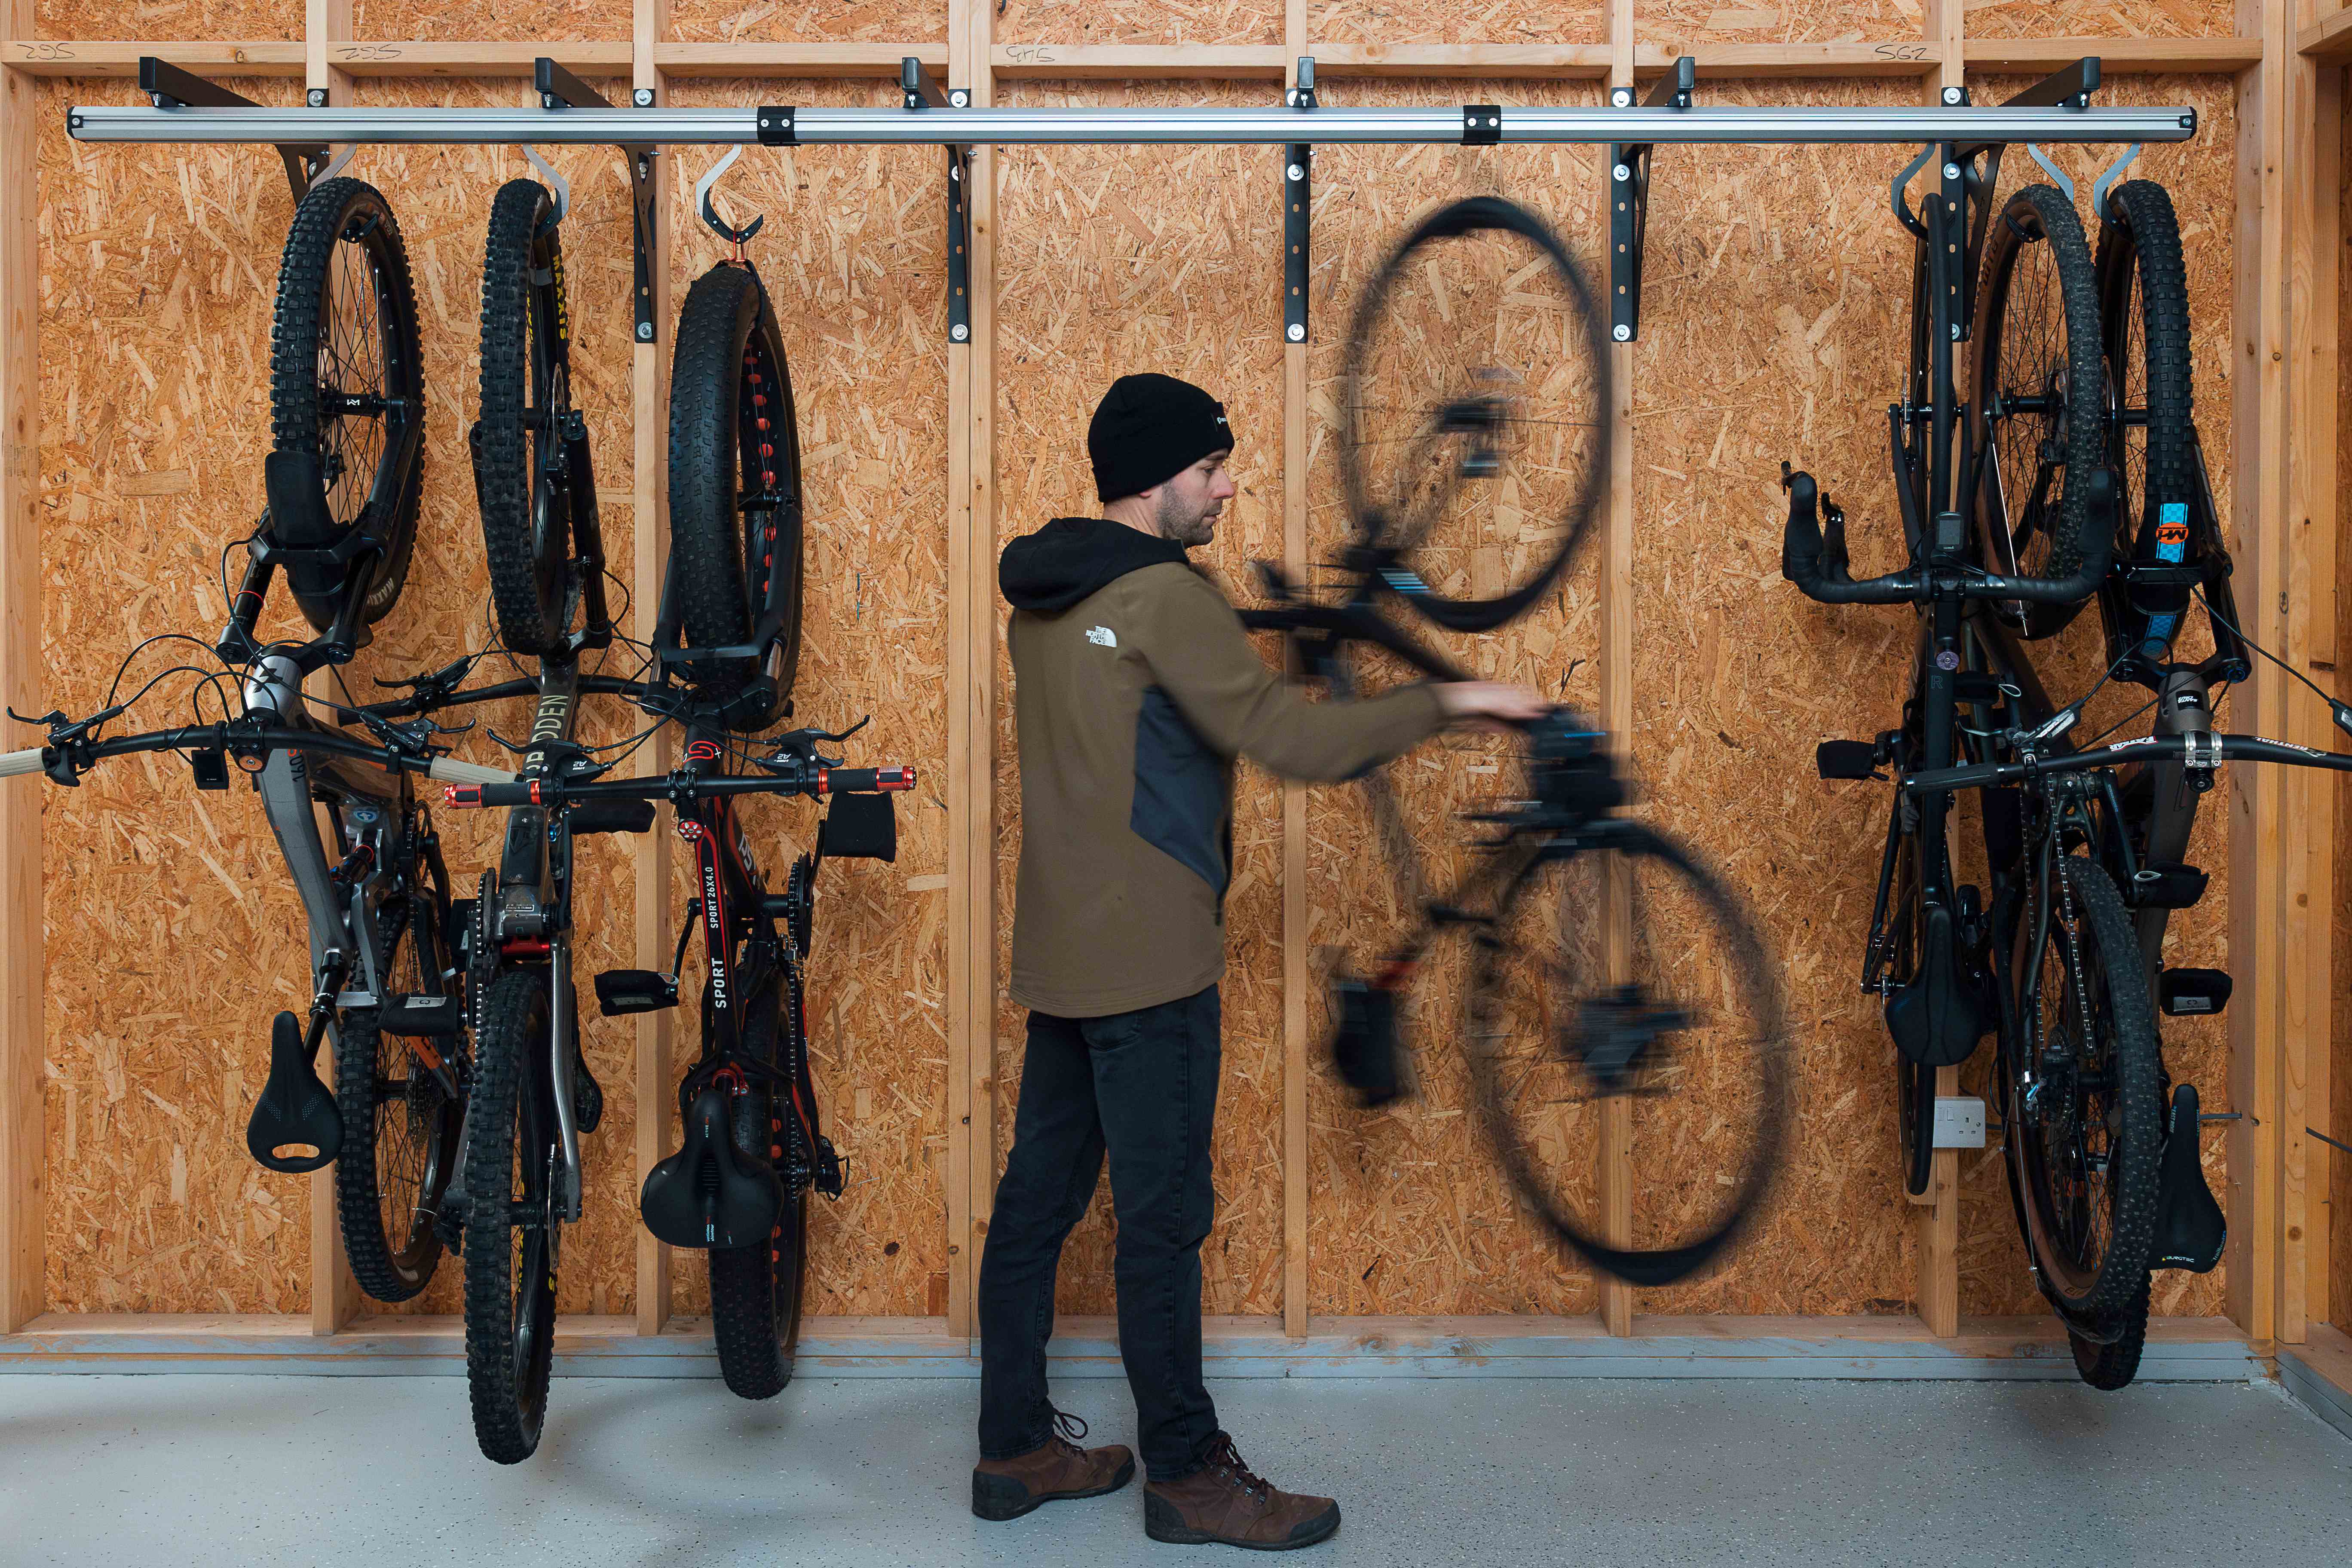 Store a range of bikes from BMXs to Mountain bikes. No matter your cycling needs, Stashed Products has you covered